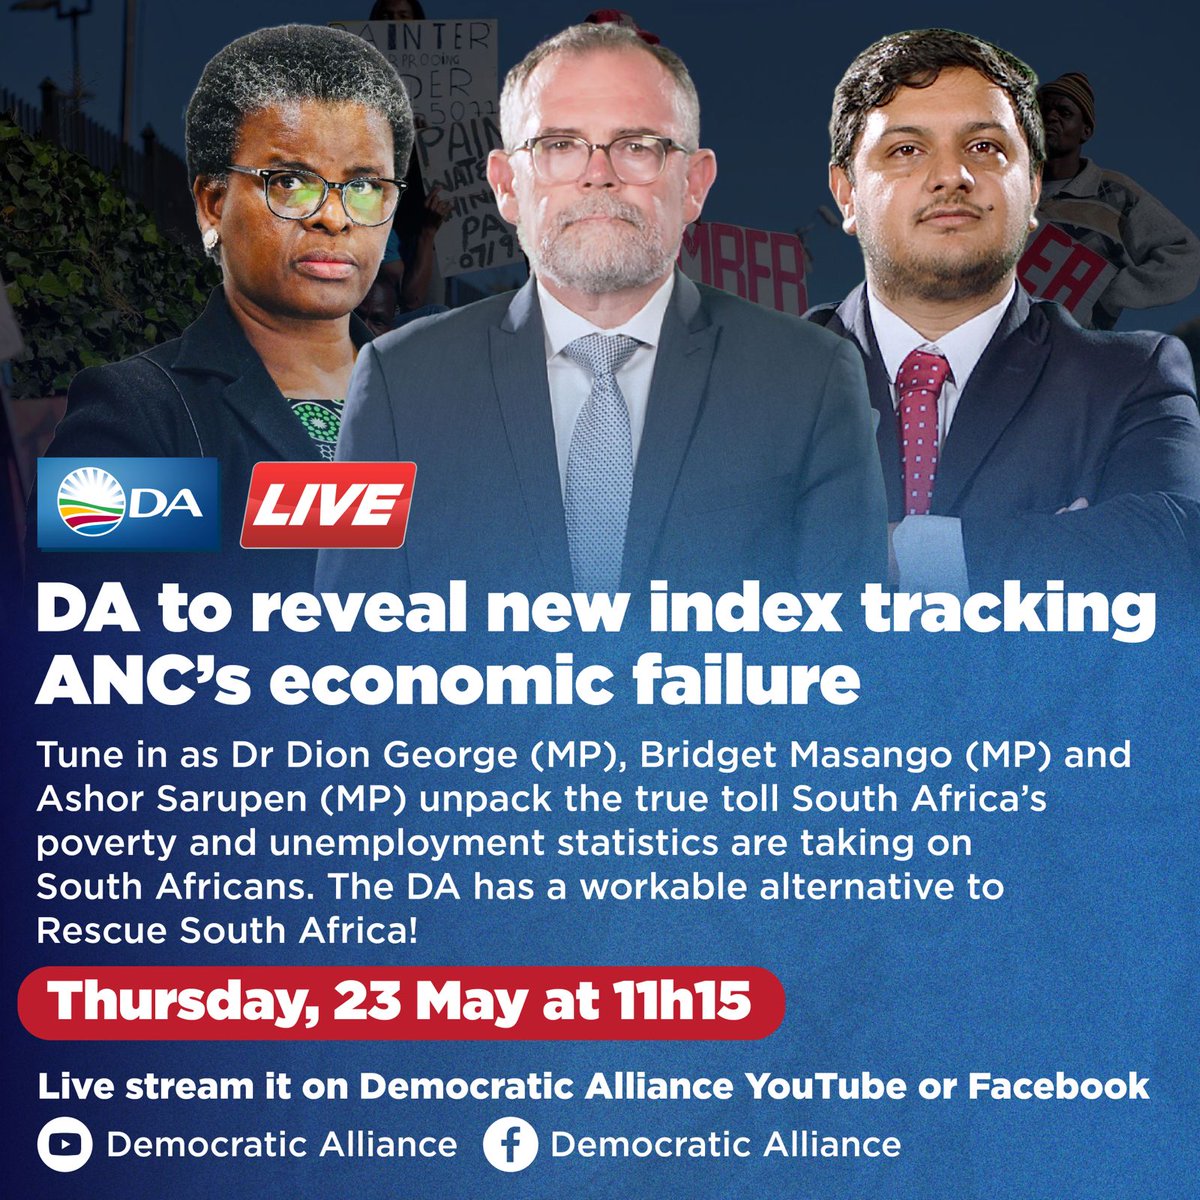 🇿🇦 Tune in today at 11h15 as Dr Dion George (MP), Bridget Masango (MP) and Ashor Sarupen (MP) unpack the Misery Index which shows the negative impact the ANC is having on livelihoods of South Africans. The DA has a plan to create jobs and turn the economy around! #VoteDA 29 May